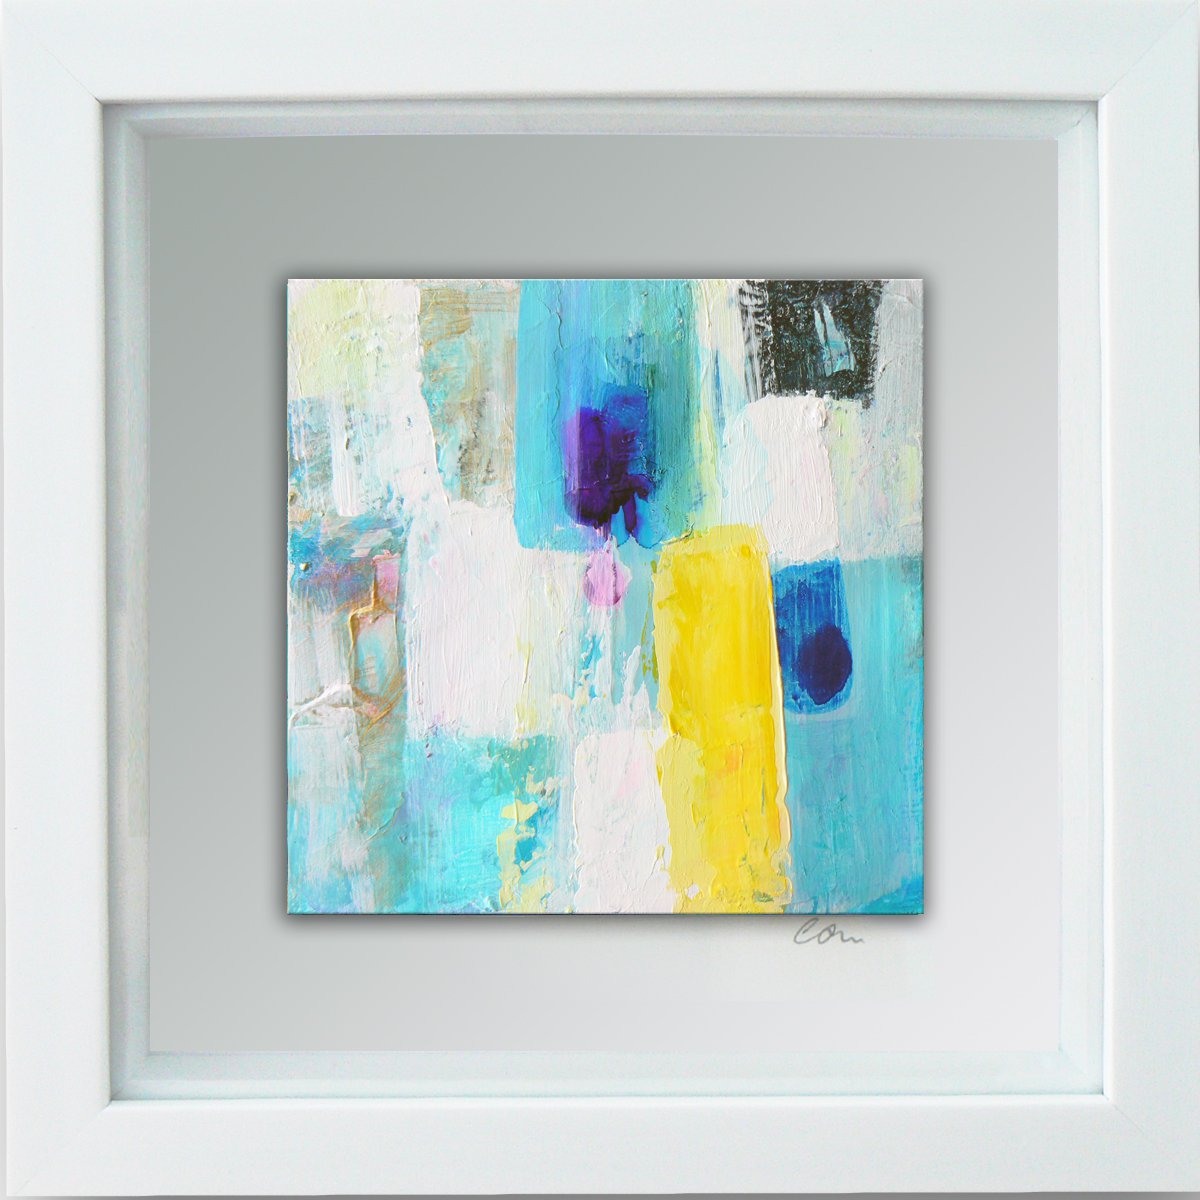 Framed ready to hang original abstract - Deep water #2 by Carolynne Coulson